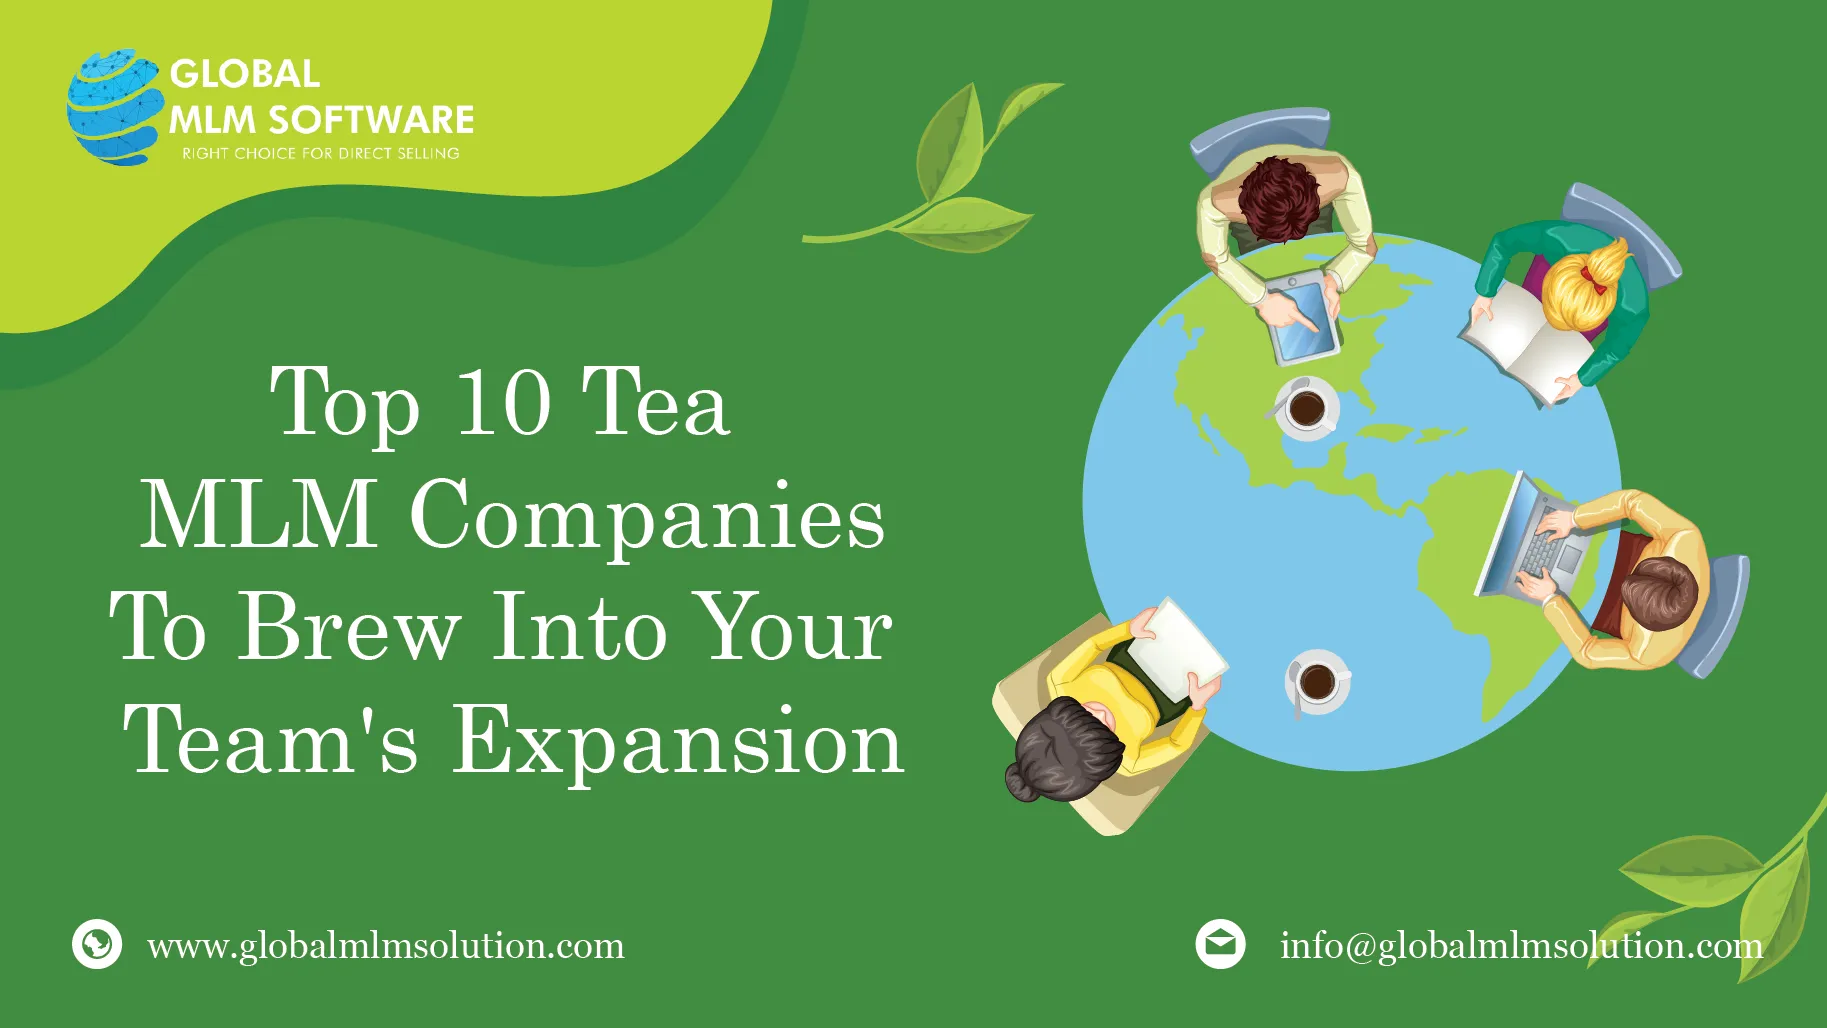 Top 10 Tea MLM Companies To Brew into Your Team's Expansion